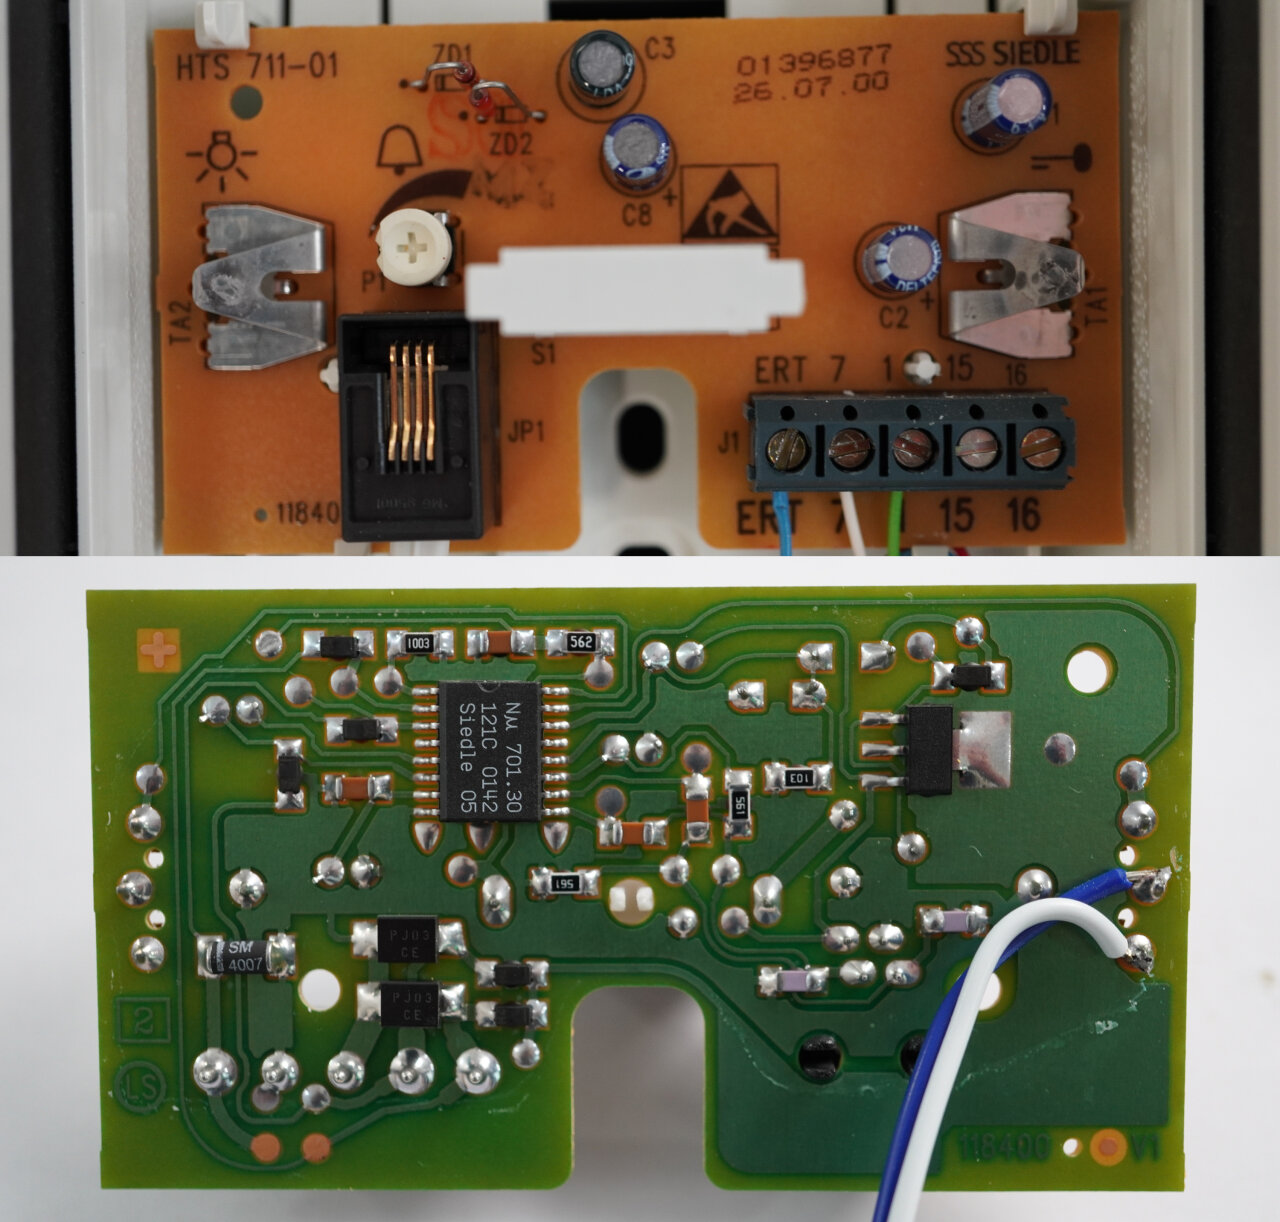 Two photos of the original board of the in-house phone. Top: front as it is mounted in the phone. Bottom: Backside with a cable pair soldered to two contacts.